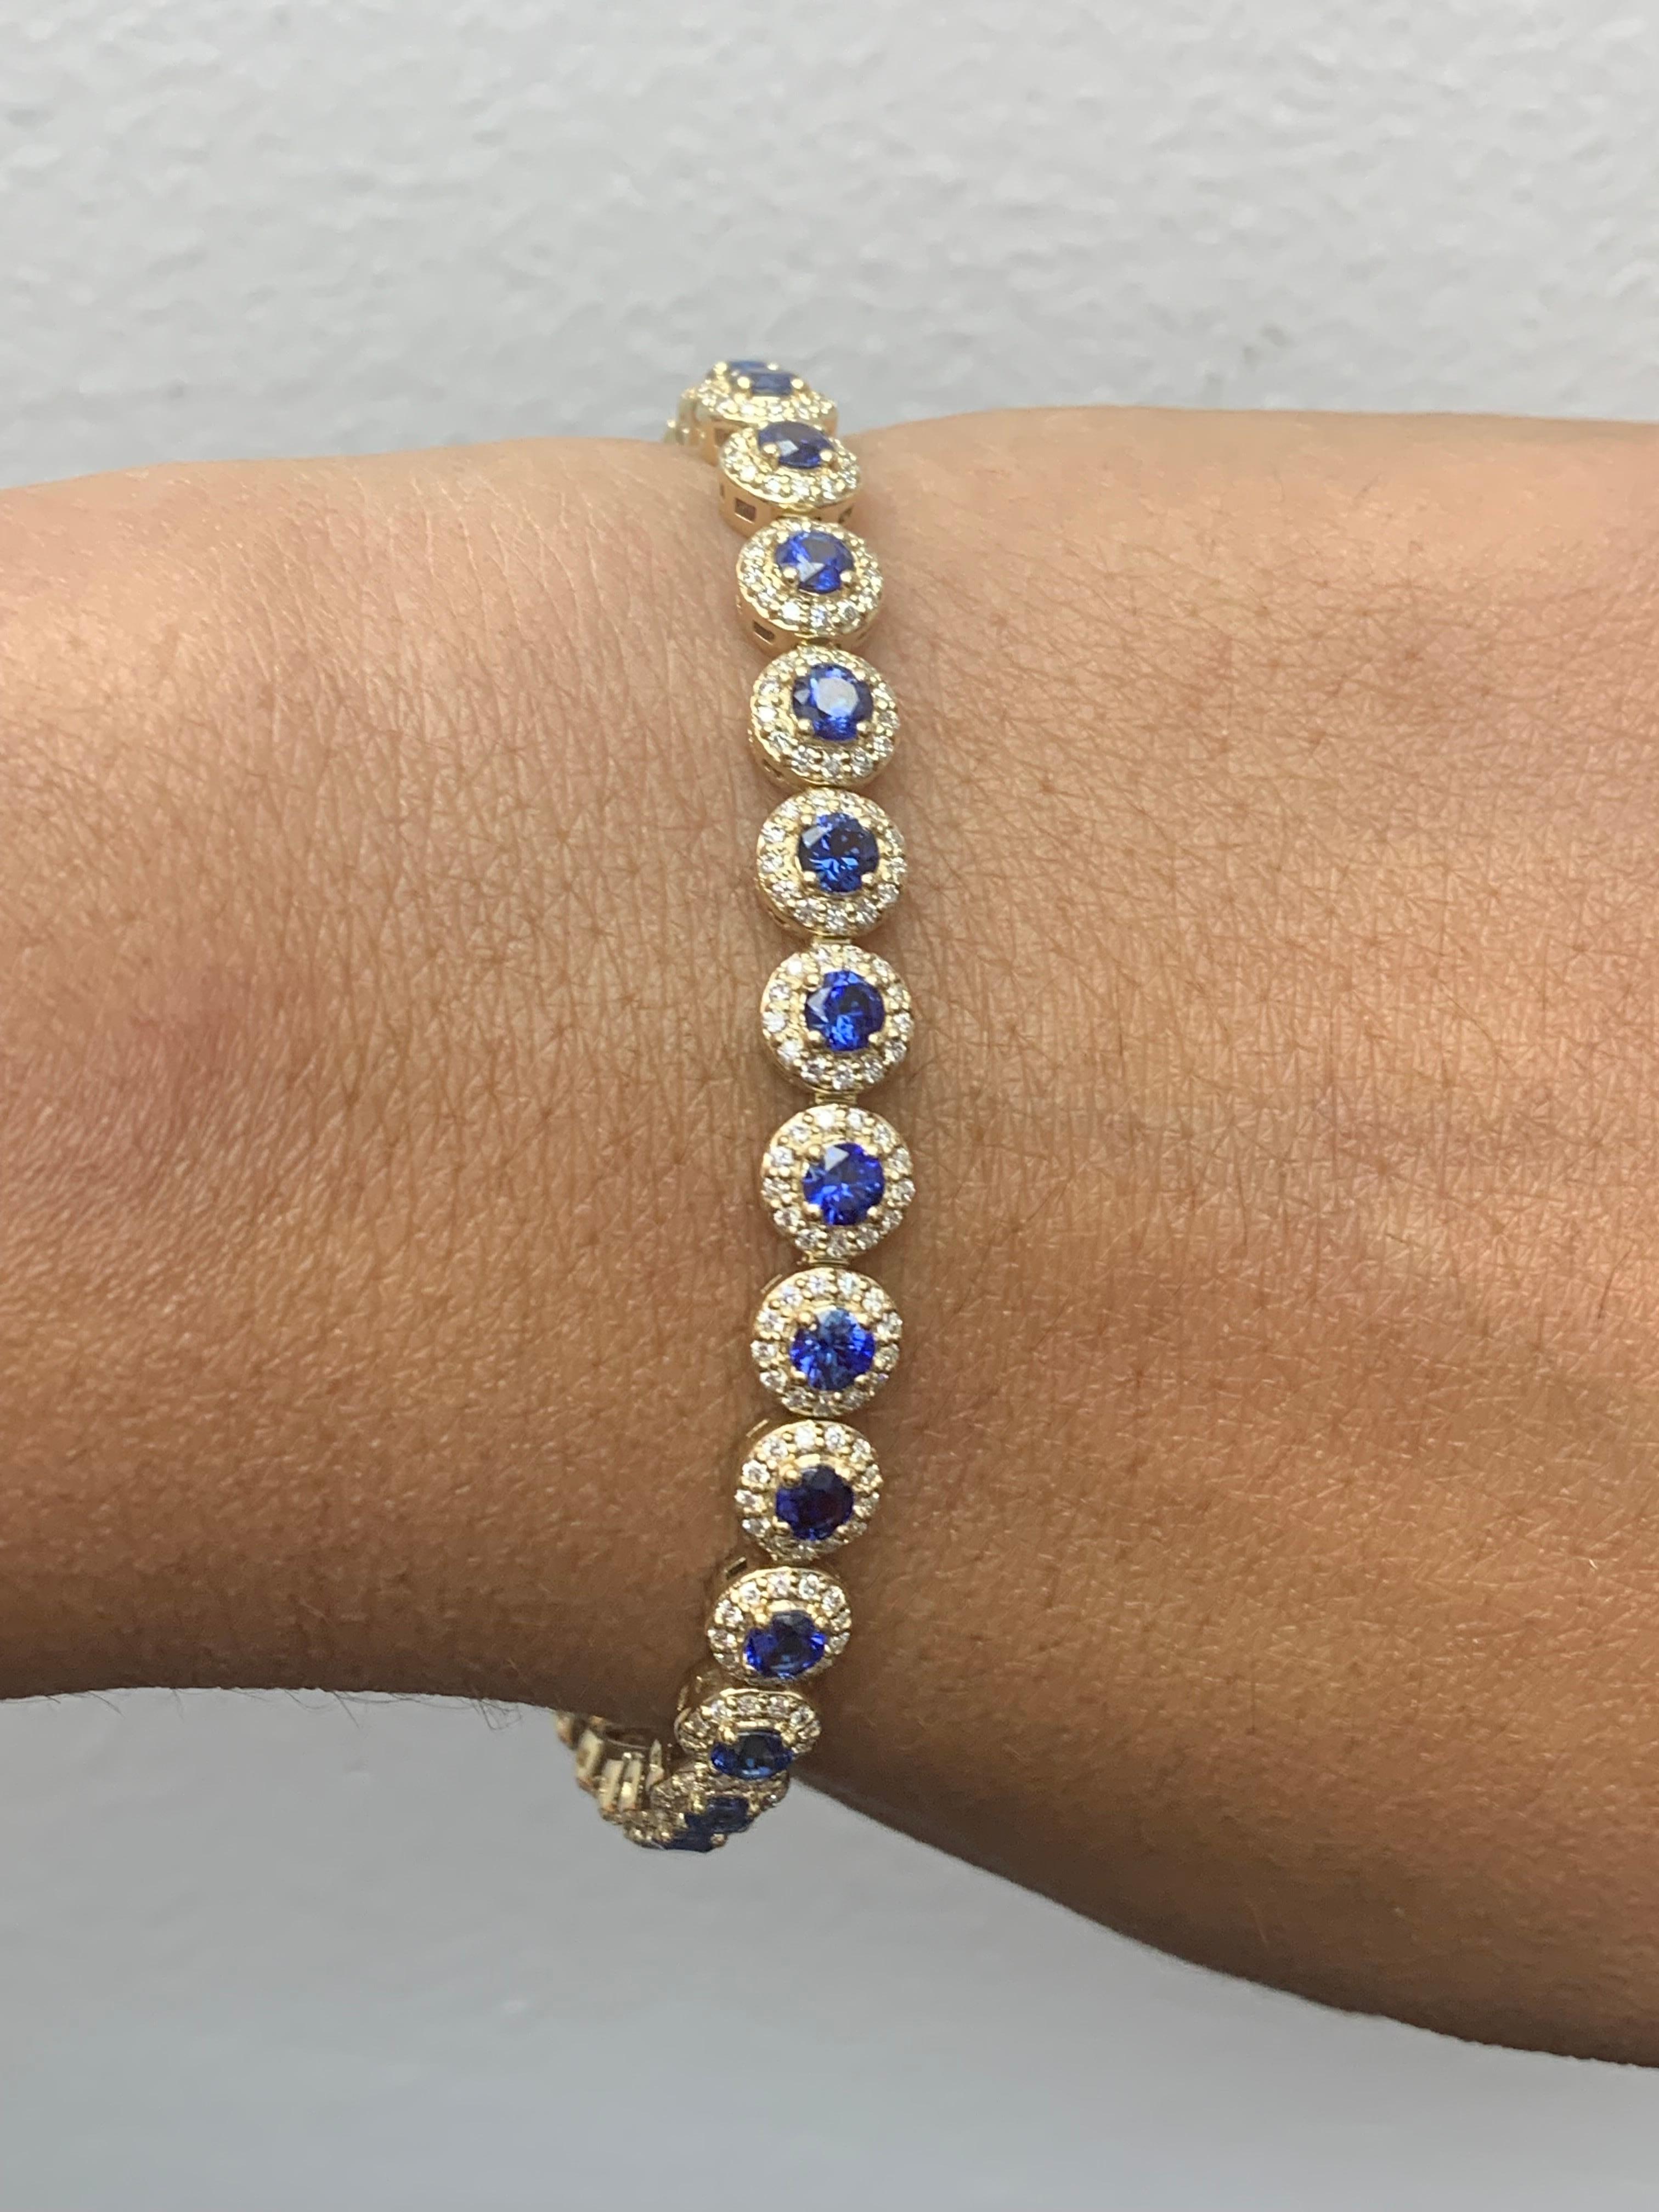 Add color to your style with this gorgeous Blue Sapphire bracelet. Features 29 Round cut blue sapphires surrounded by a single row of sparkling 377 round diamonds in a halo setting.  Sapphires and diamonds weigh 4.67 carats and 1.57 carats total